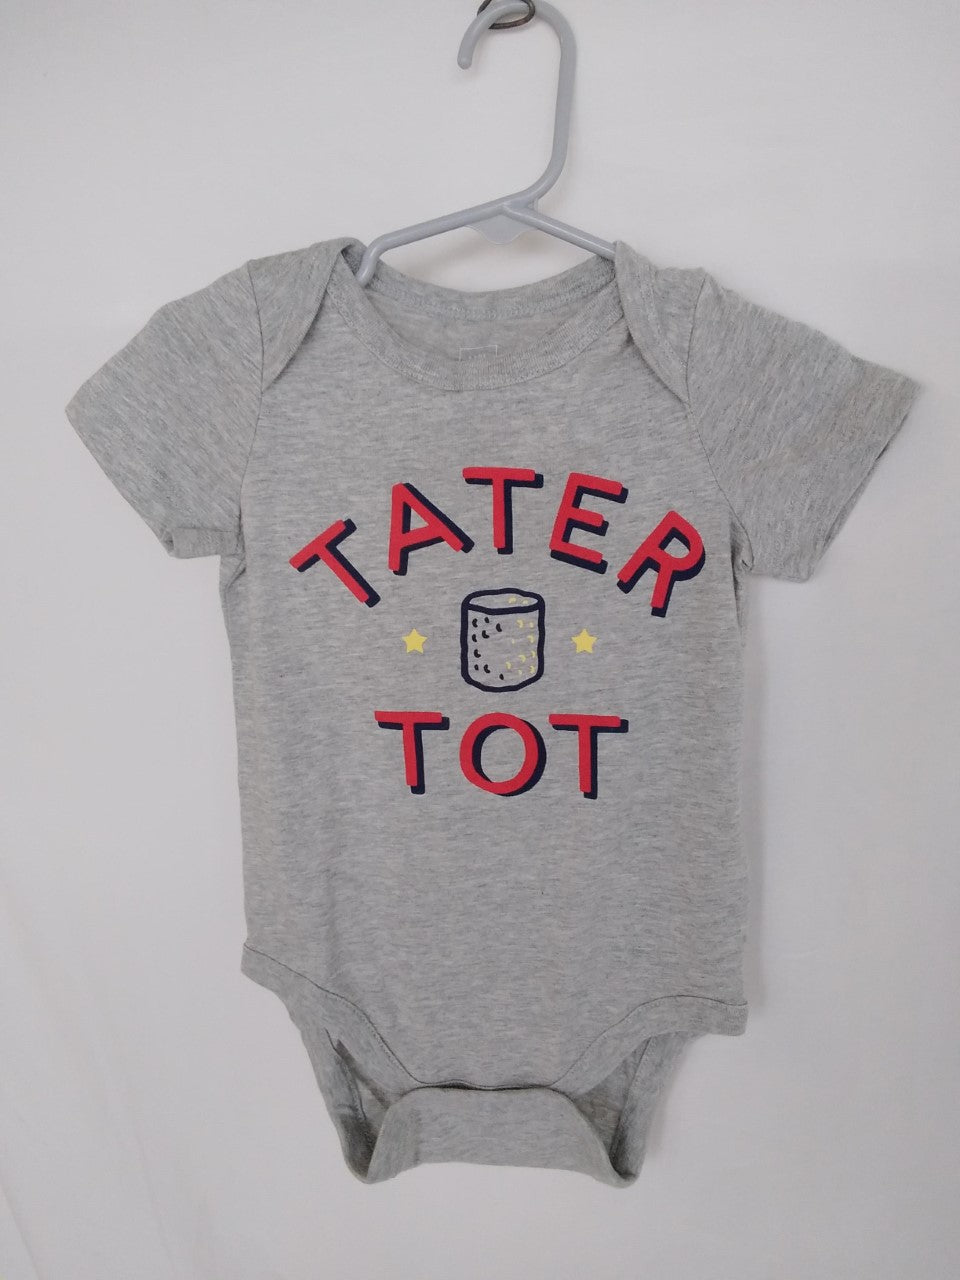 Baby Gap Gray Tater Tot One Piece - Size 12-18 months